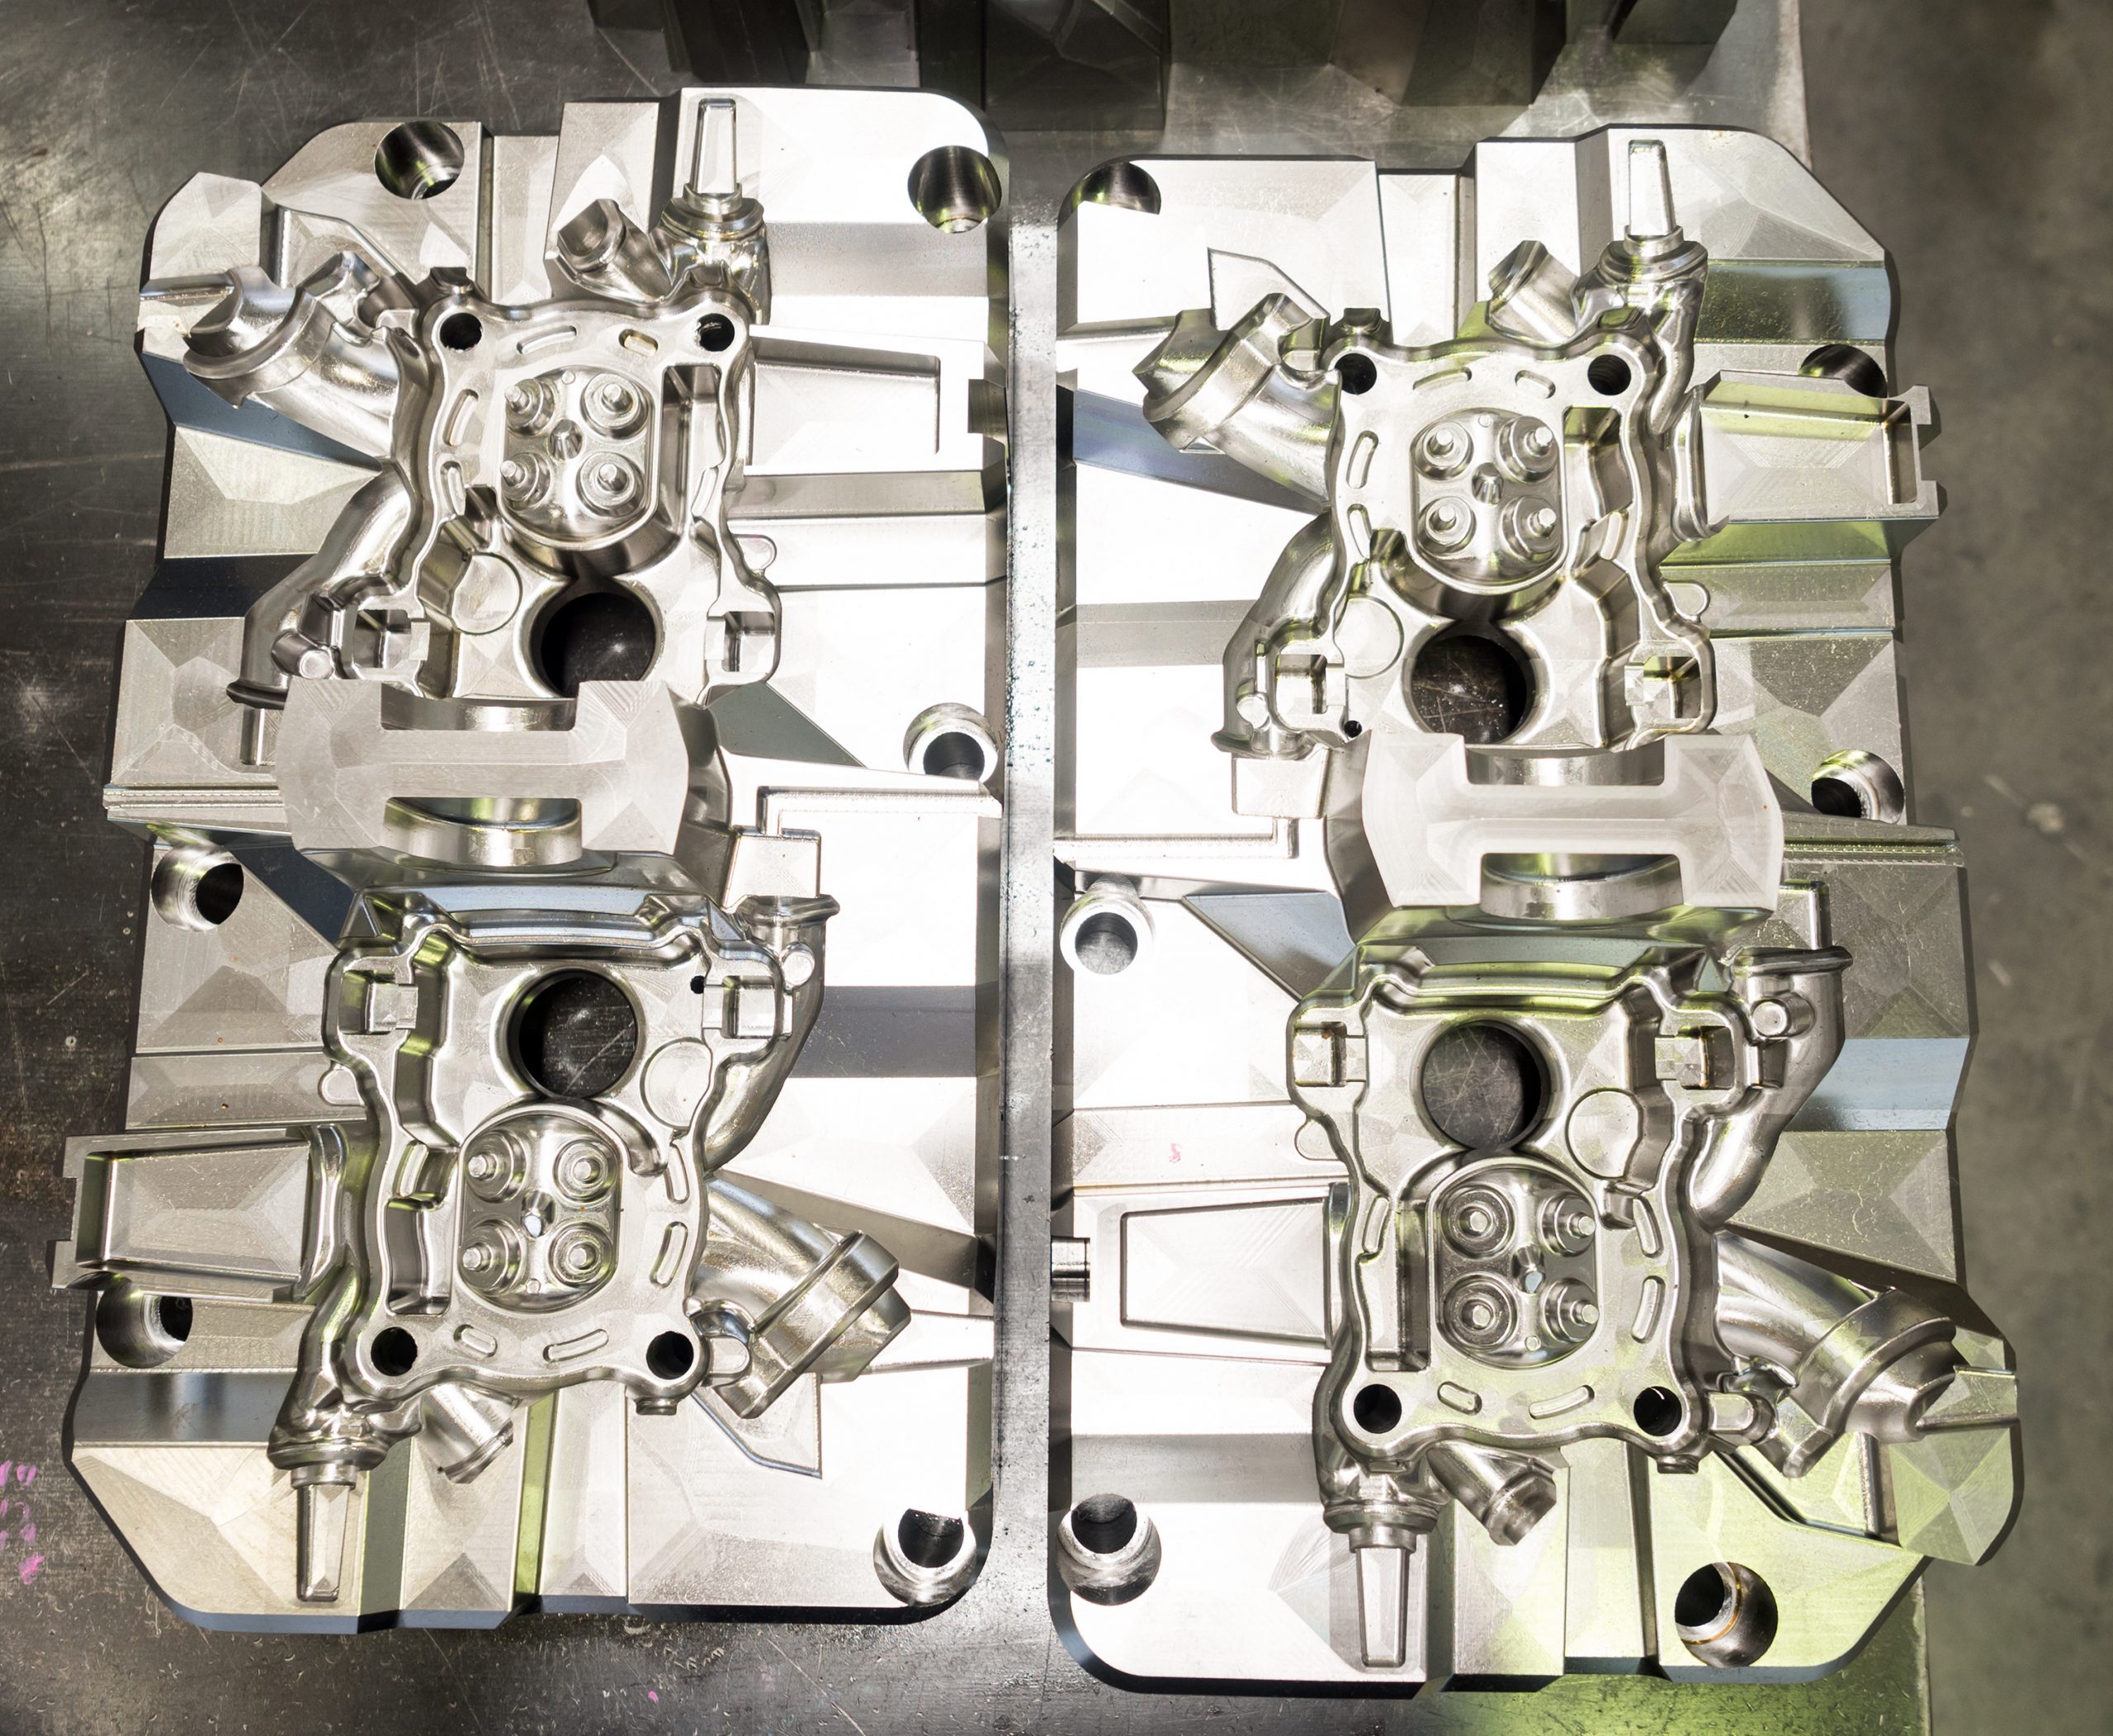 Four high precision manufactured mold and die for automotive placed on a metal table